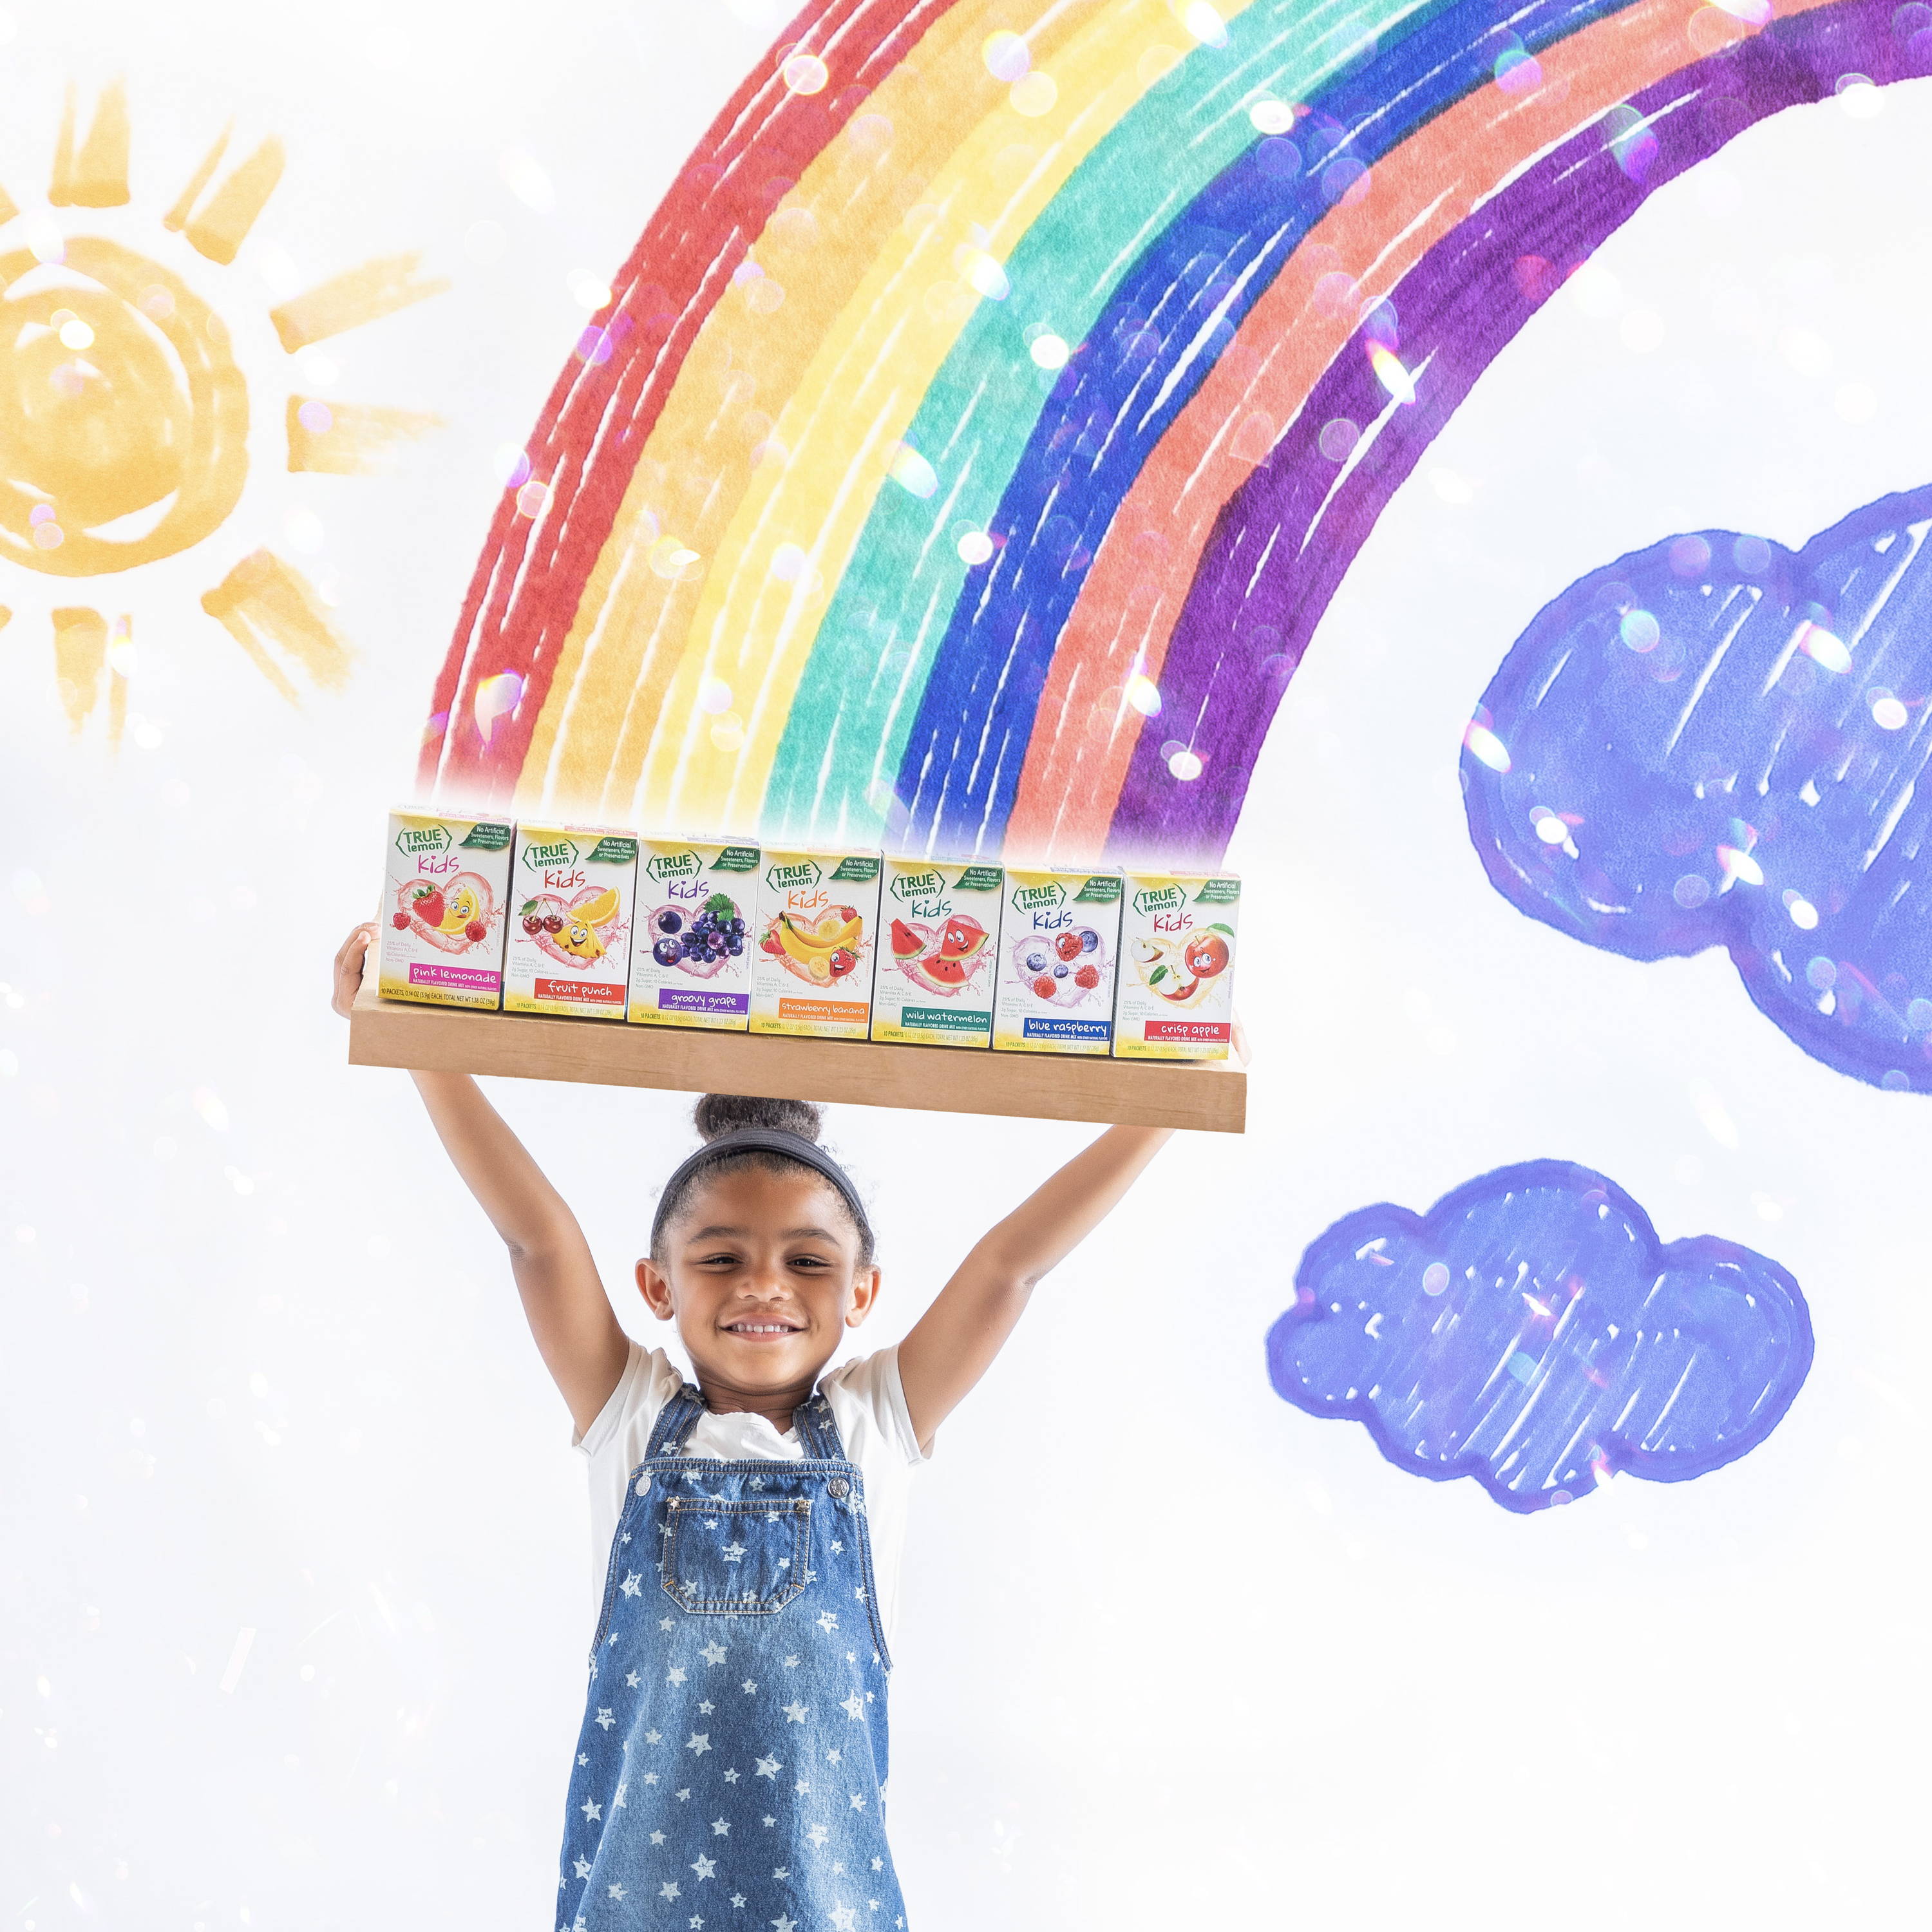 At the end of a rainbow a girl in blue jumper holds up 7 boxes of different flavored true lemon drink mixes